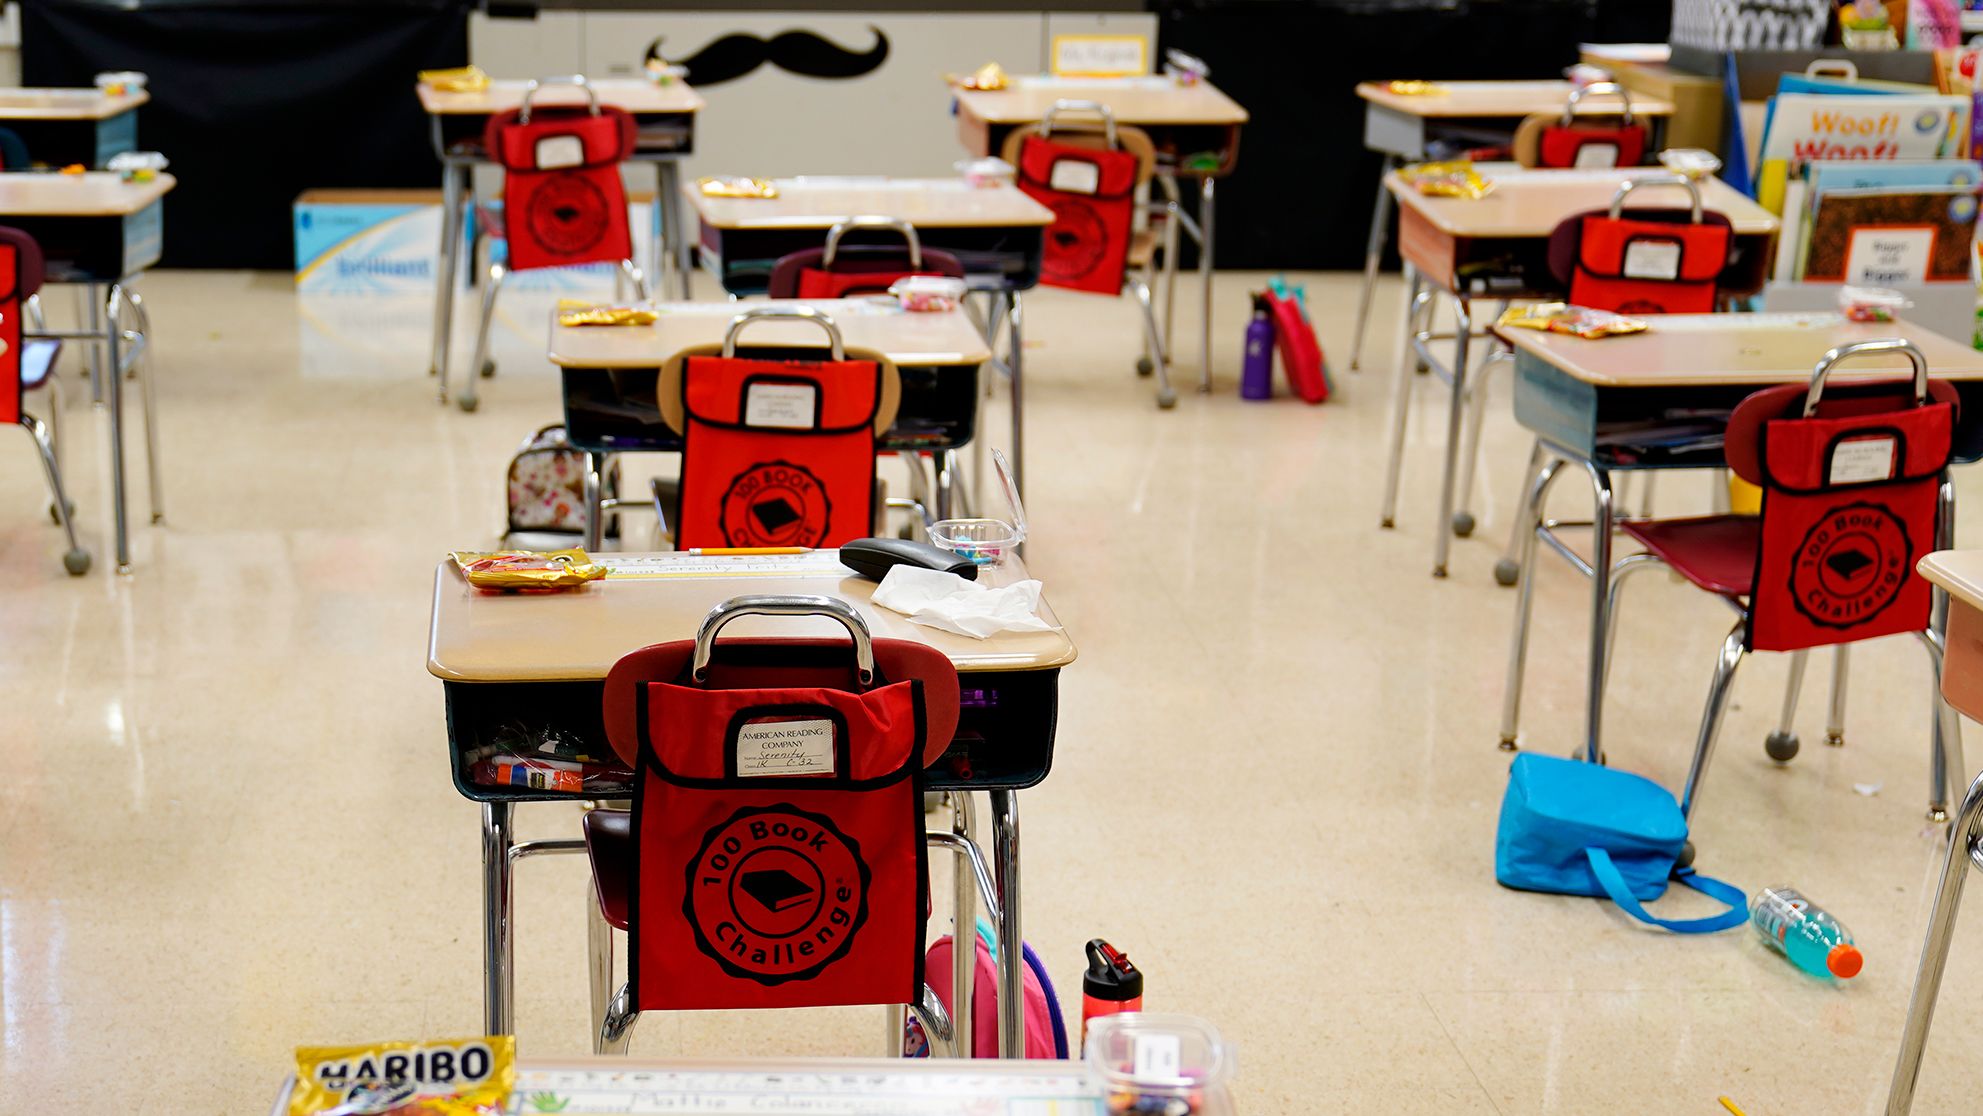 Desks are arranged in an elementary school in Nesquehoning, Pennsylvania. In the fall, vaccinated teachers and students no longer need to wear masks inside schools, according to new CDC guidance. 